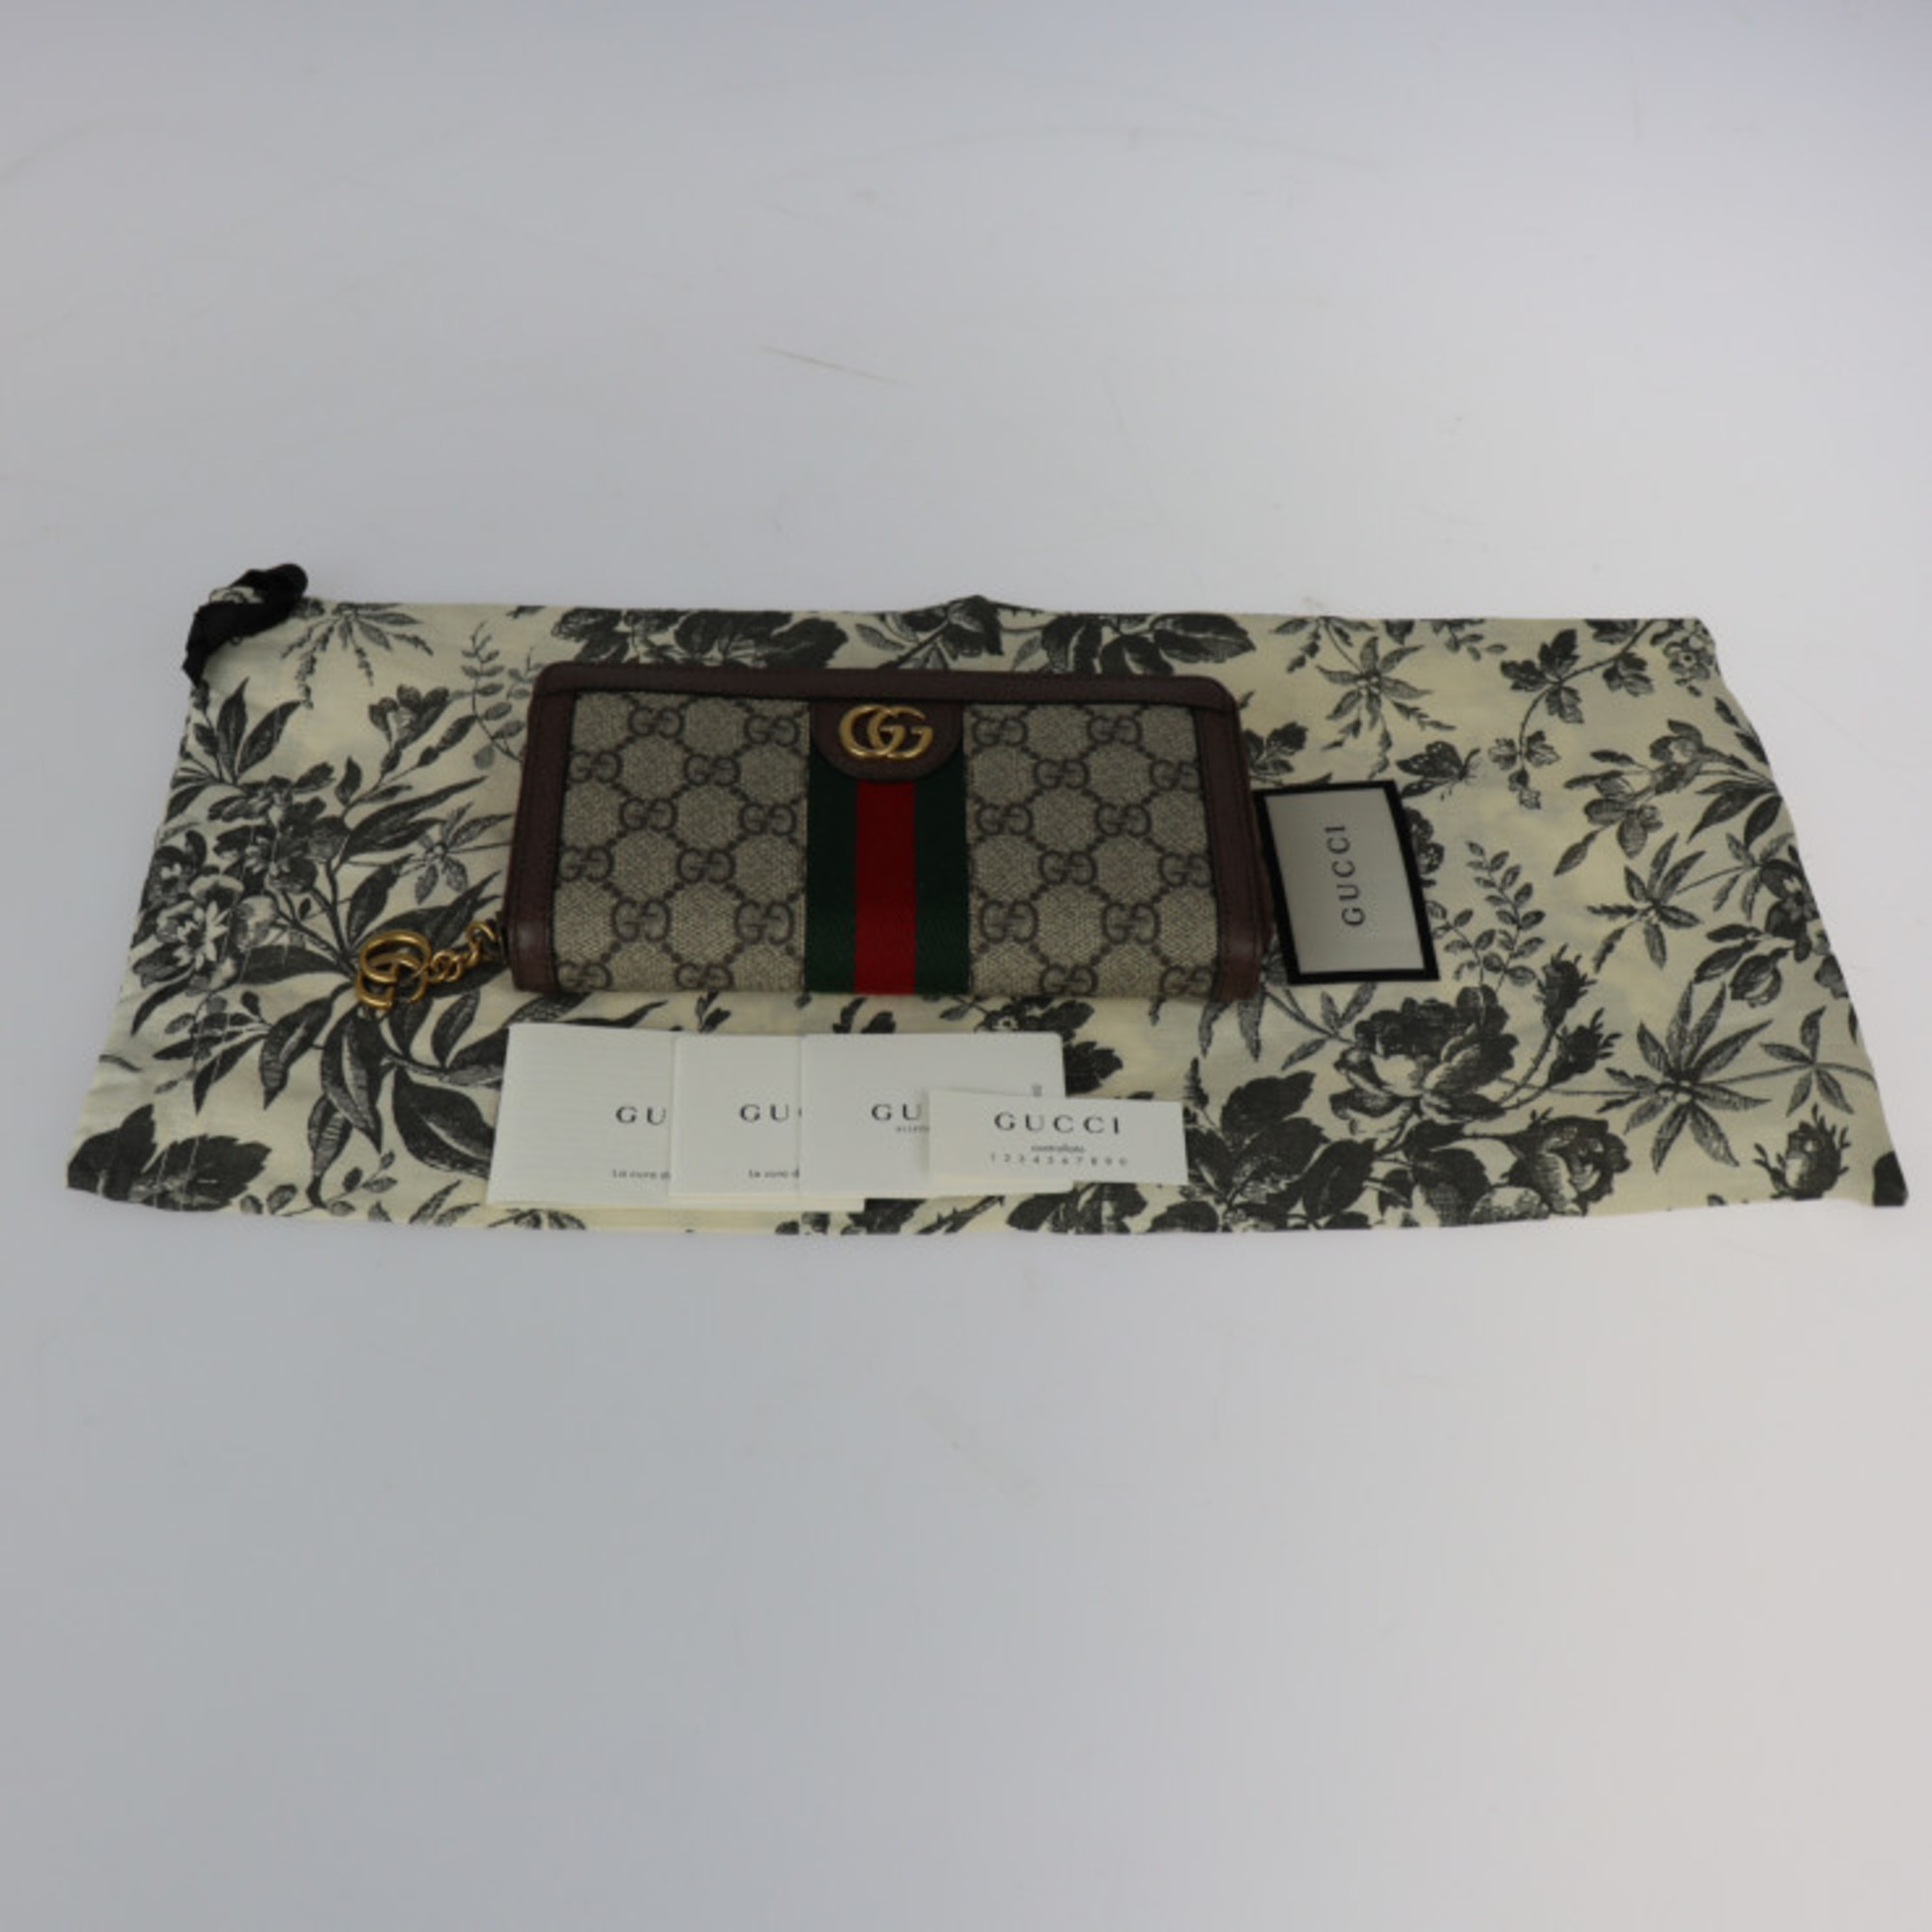 GUCCI Gucci Ophidia GG Zip Around Wallet DIY Long 604149 Supreme Canvas Leather Beige Ebony Red Green Gold Hardware Round Zipper